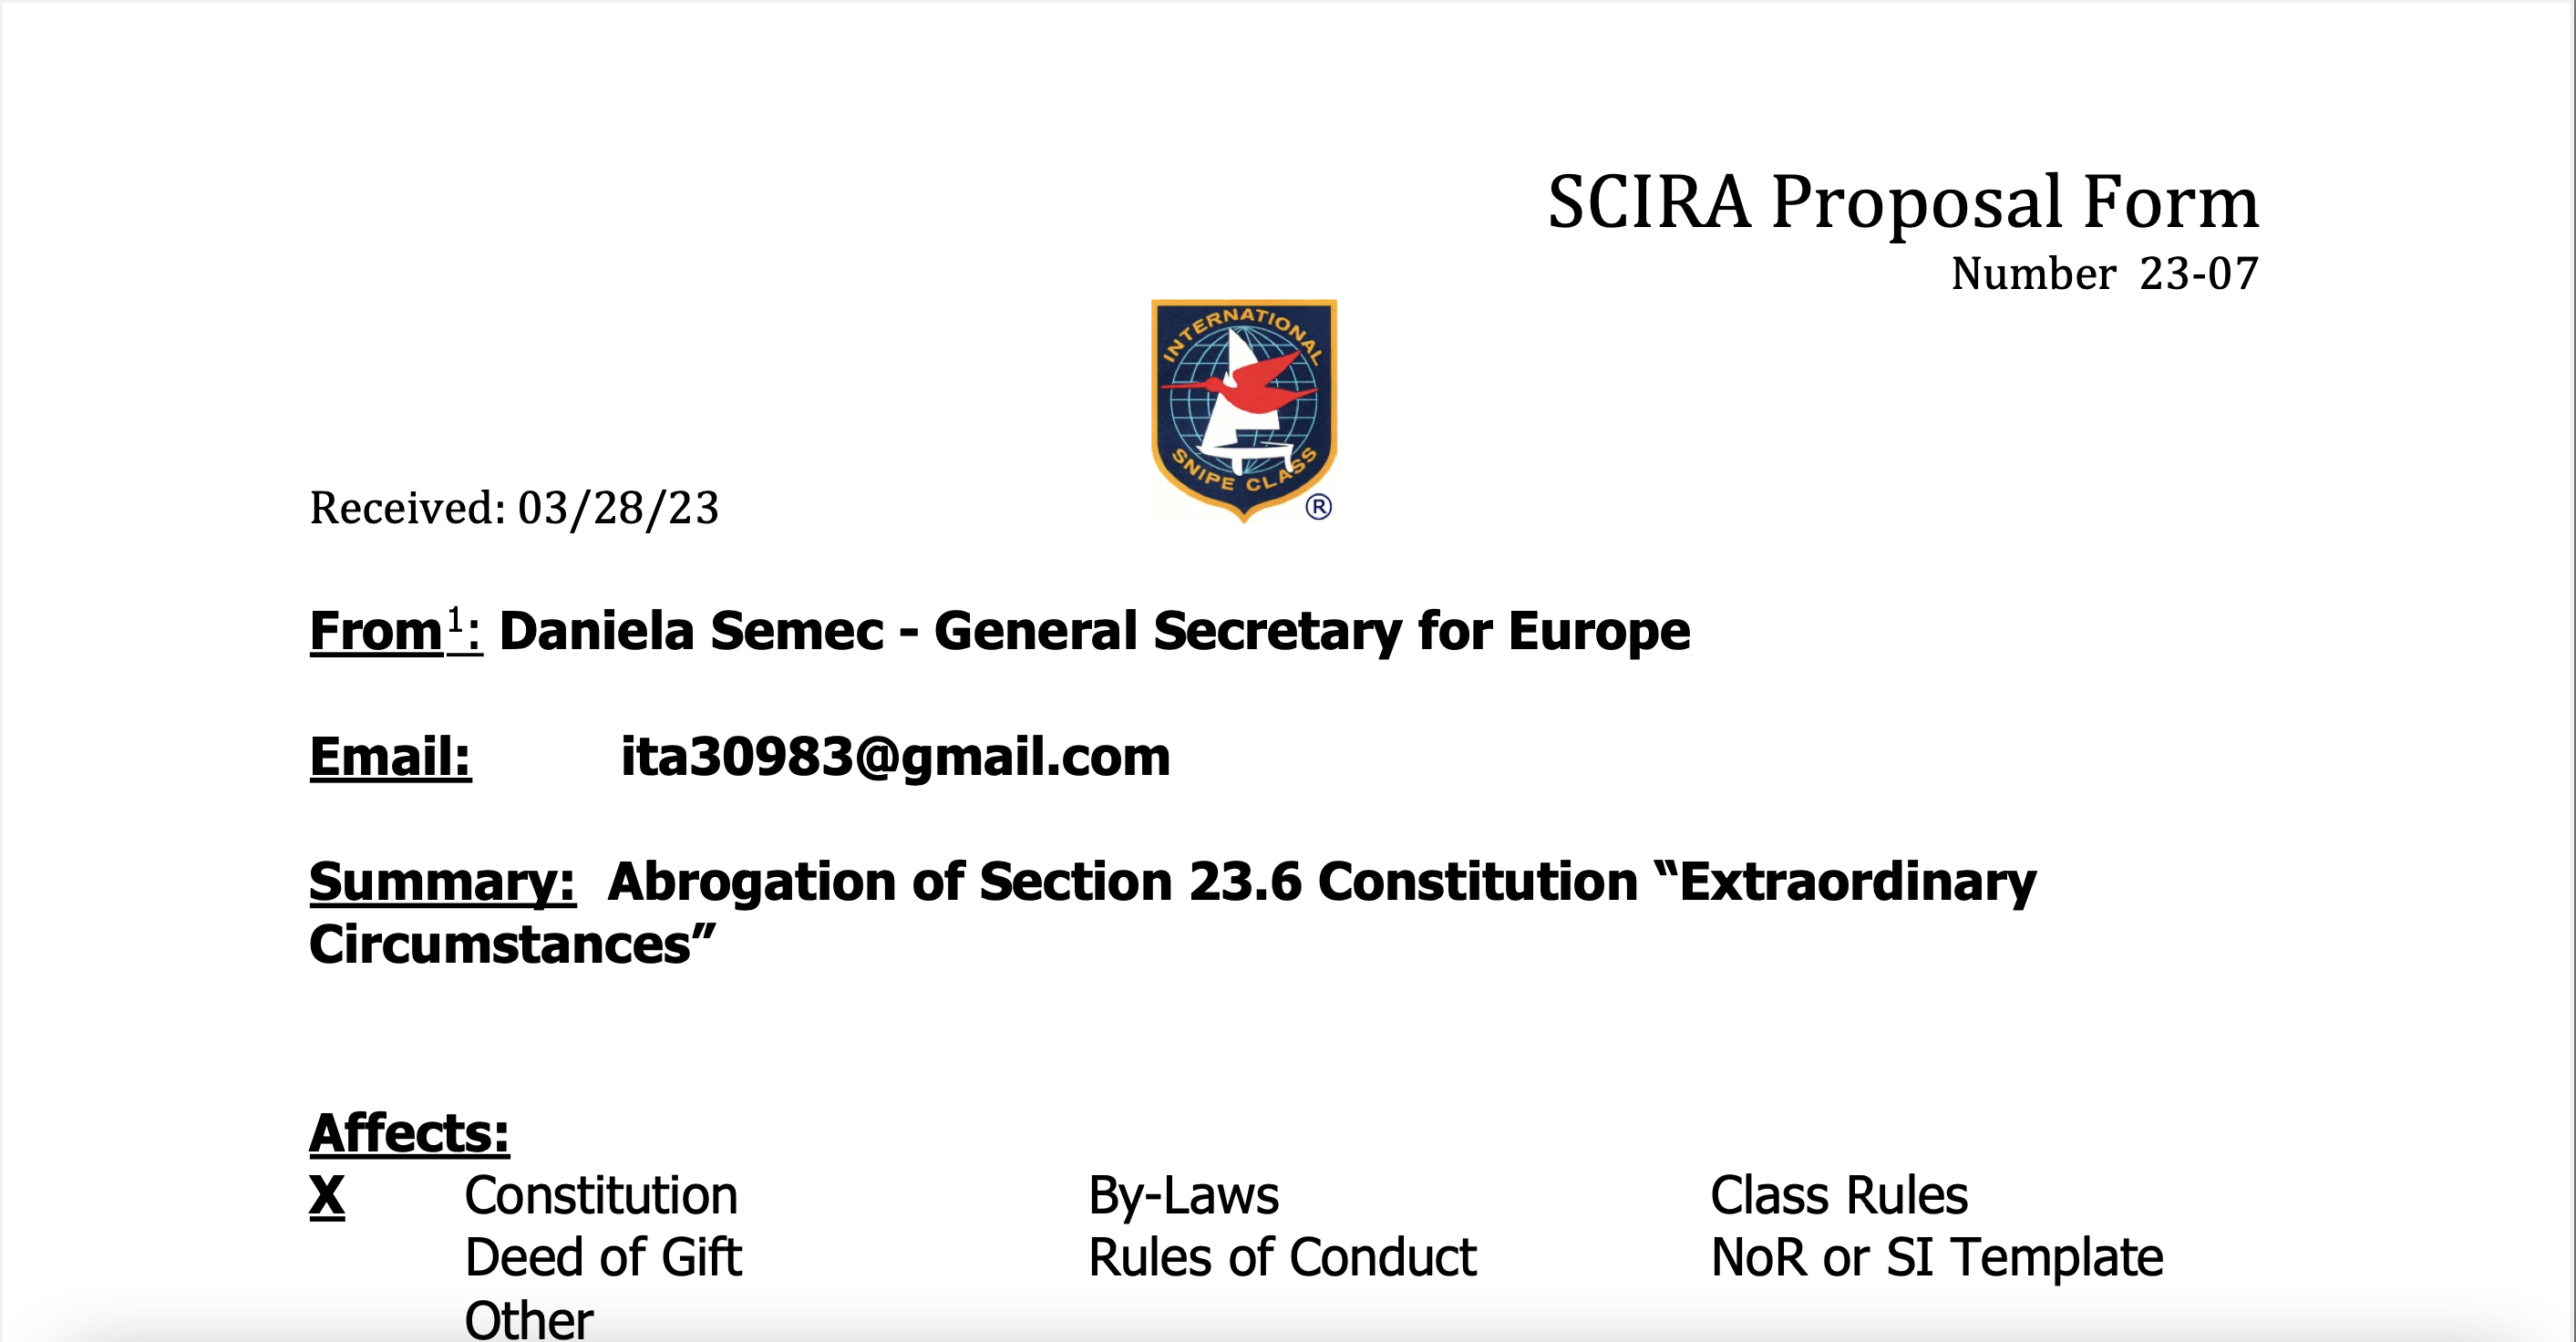 Rule Change Proposal: 23-07 SCIRA Section 23.6 Constitution Image